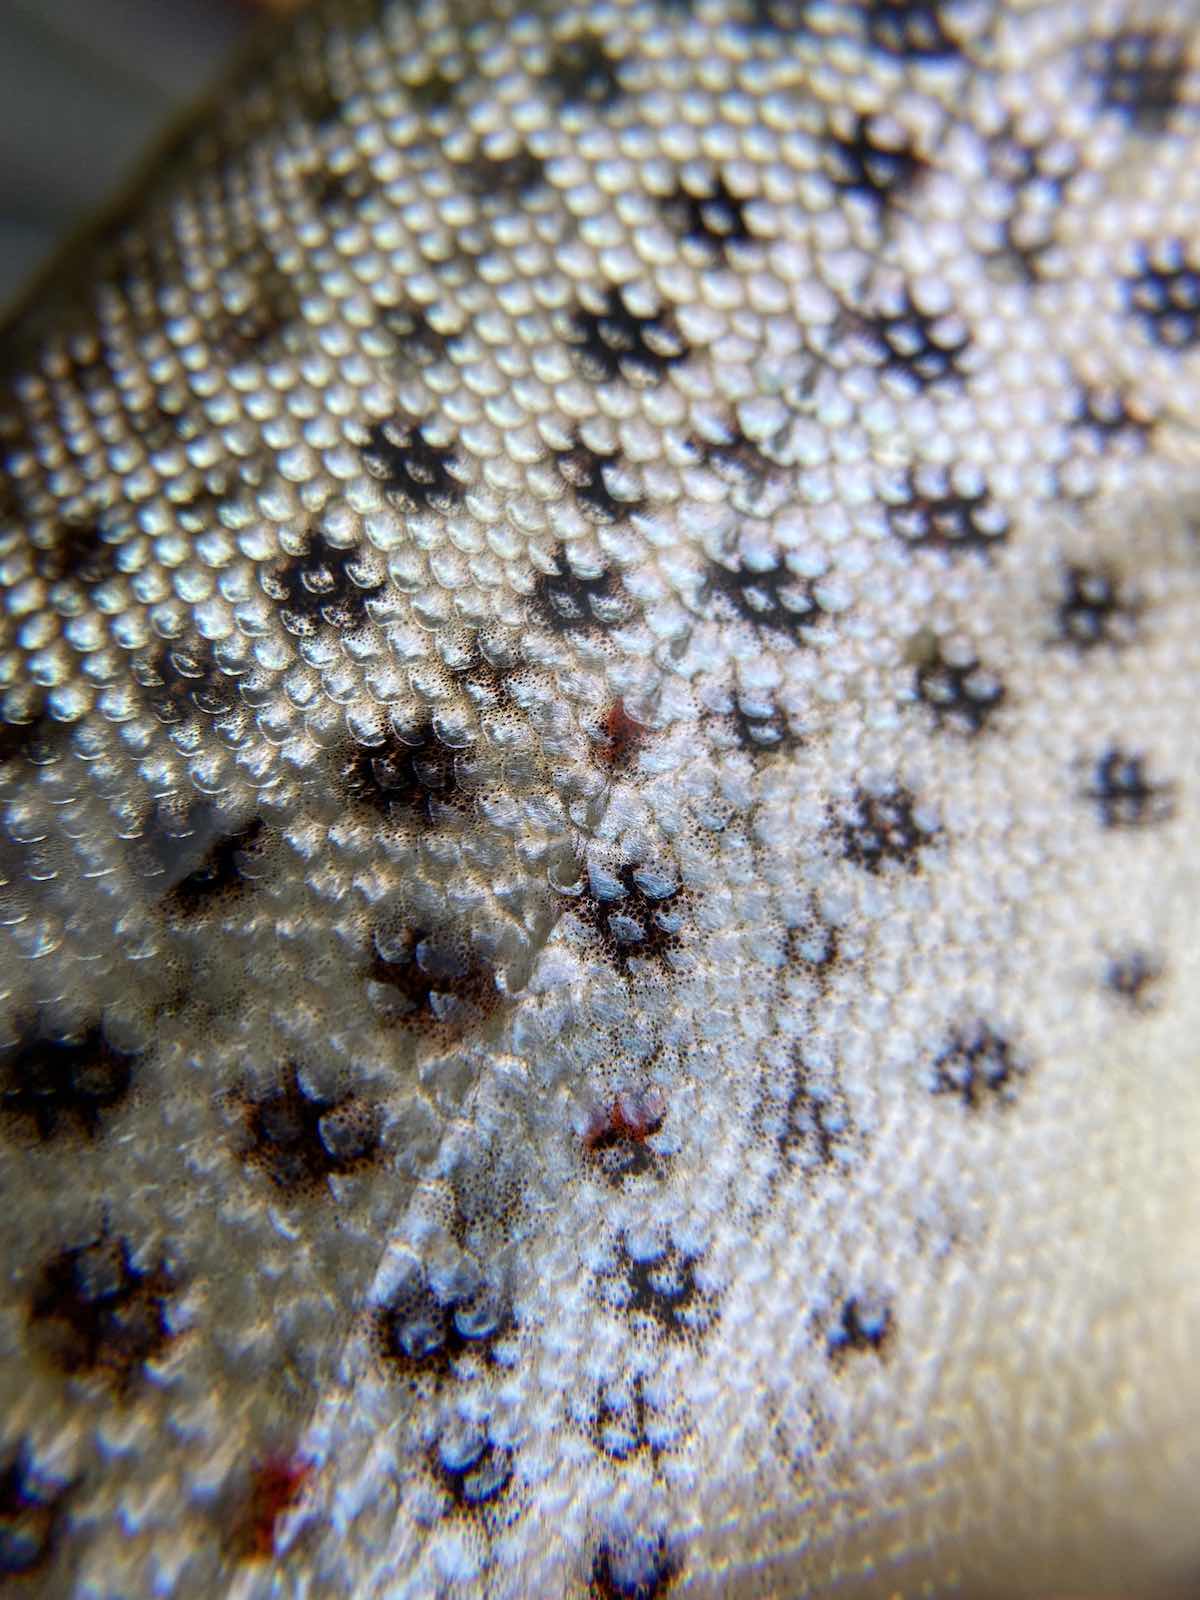 Close-up picture showing trout scales